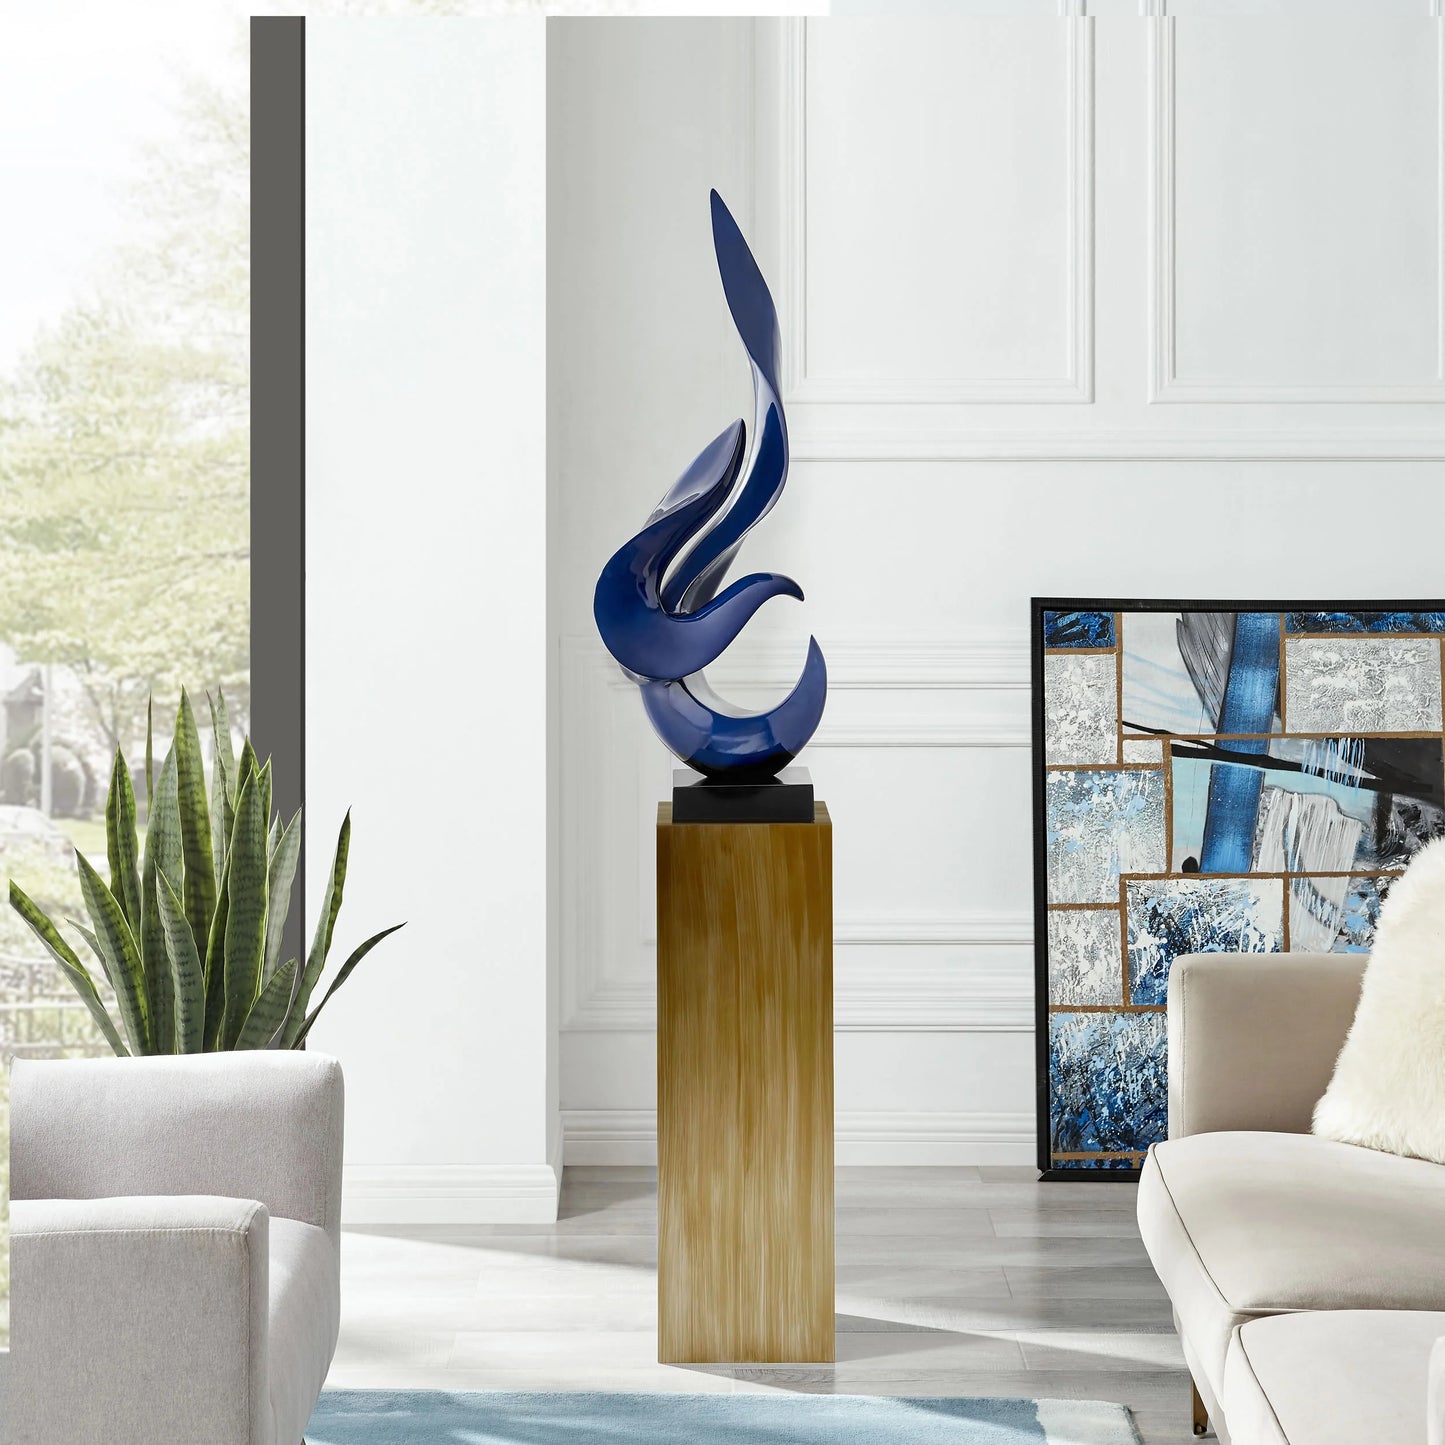 Finesse Decor Navy Blue Flame Floor Sculpture With Bronze Stand 2